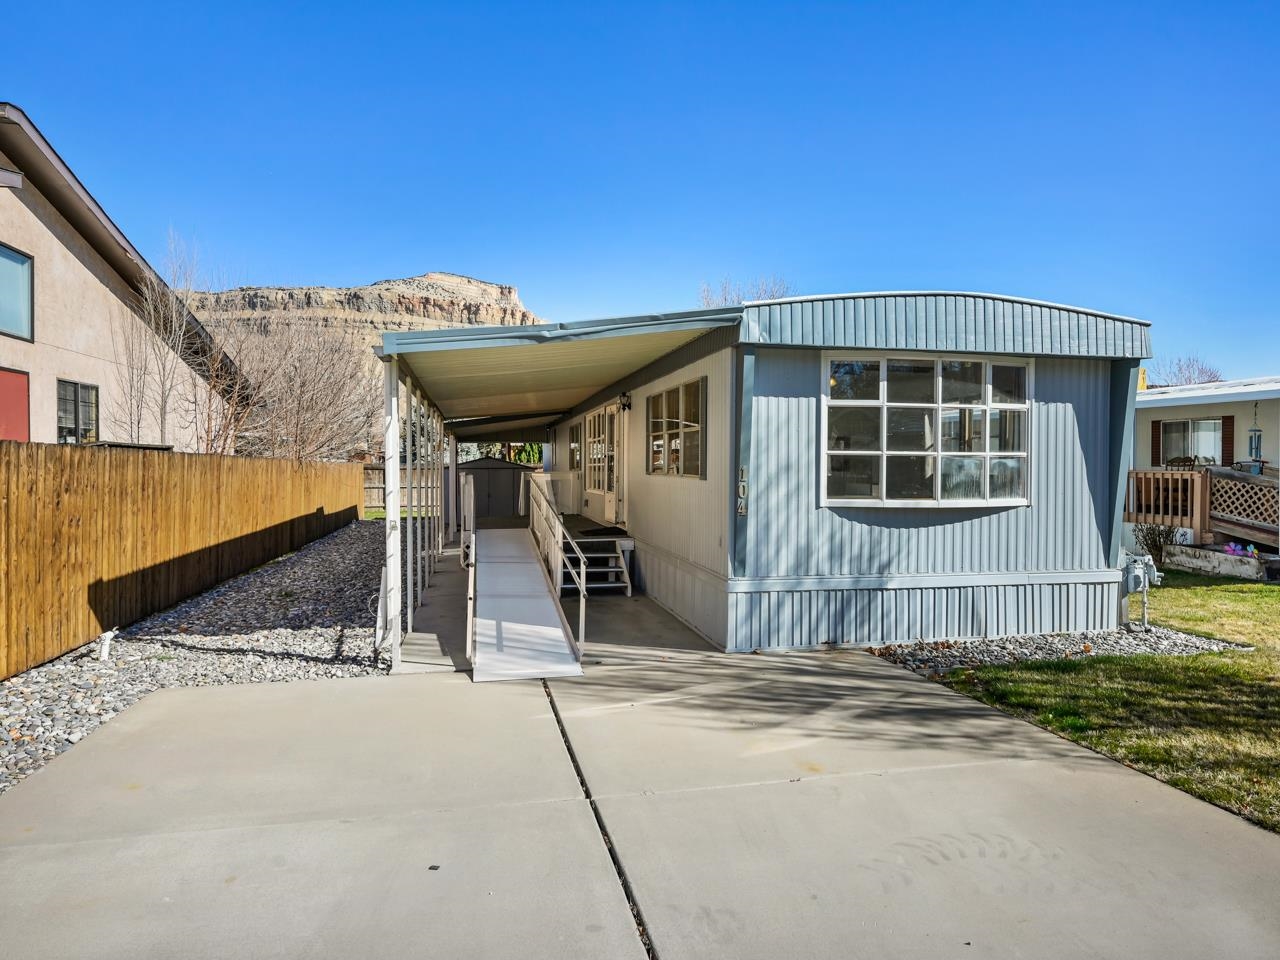 Welcome to this charming retreat in Palisade, Colorado! Nestled in the picturesque Sunset Park community right next to the Colorado River, close to downtown Palisade, and across the main road from Veterans’ Memorial Park, this single wide modular home offers a perfect blend of comfort and convenience. As you step inside, you're greeted by an abundance of natural light that illuminates the entire home, creating a warm and inviting atmosphere. The spacious living room has three large picture windows to enjoy as well as being open to the kitchen and dining room. The flooring features a mix of LVP, carpeting, and durable linoleum in the kitchen. The kitchen has ample built-in cabinetry and counter space, a double wall oven, a pantry, and a gas range, making meal preparation easy. The adjacent dining area has a built-in mirrored sideboard offering an ideal space for enjoying meals. Retreat to the spacious 4-piece full bath, complete with an owned walk-in tub/shower featuring grab bars for added safety and comfort. Both the primary bedroom and the secondary bedroom are bright with large closets. Outside, the landscaped front and backyard welcome you to unwind and soak in the stunning views of The Bookcliffs and Grand Mesa. The outdoor space includes a shed for extra storage and both a covered patio and deck to enjoy. The landscaping is irrigated and cared for through the HOA making this a minimum effort property. With two designated parking spaces, you have easy access to your home. Experience the beauty of Palisade living in this delightful home that combines convenience, comfort, and breathtaking views. Don't miss your chance to make it yours!  There is a $65 fee for the Park application which needs to be completed by the buyer after a signed contract has been received. This is a 55+ community.